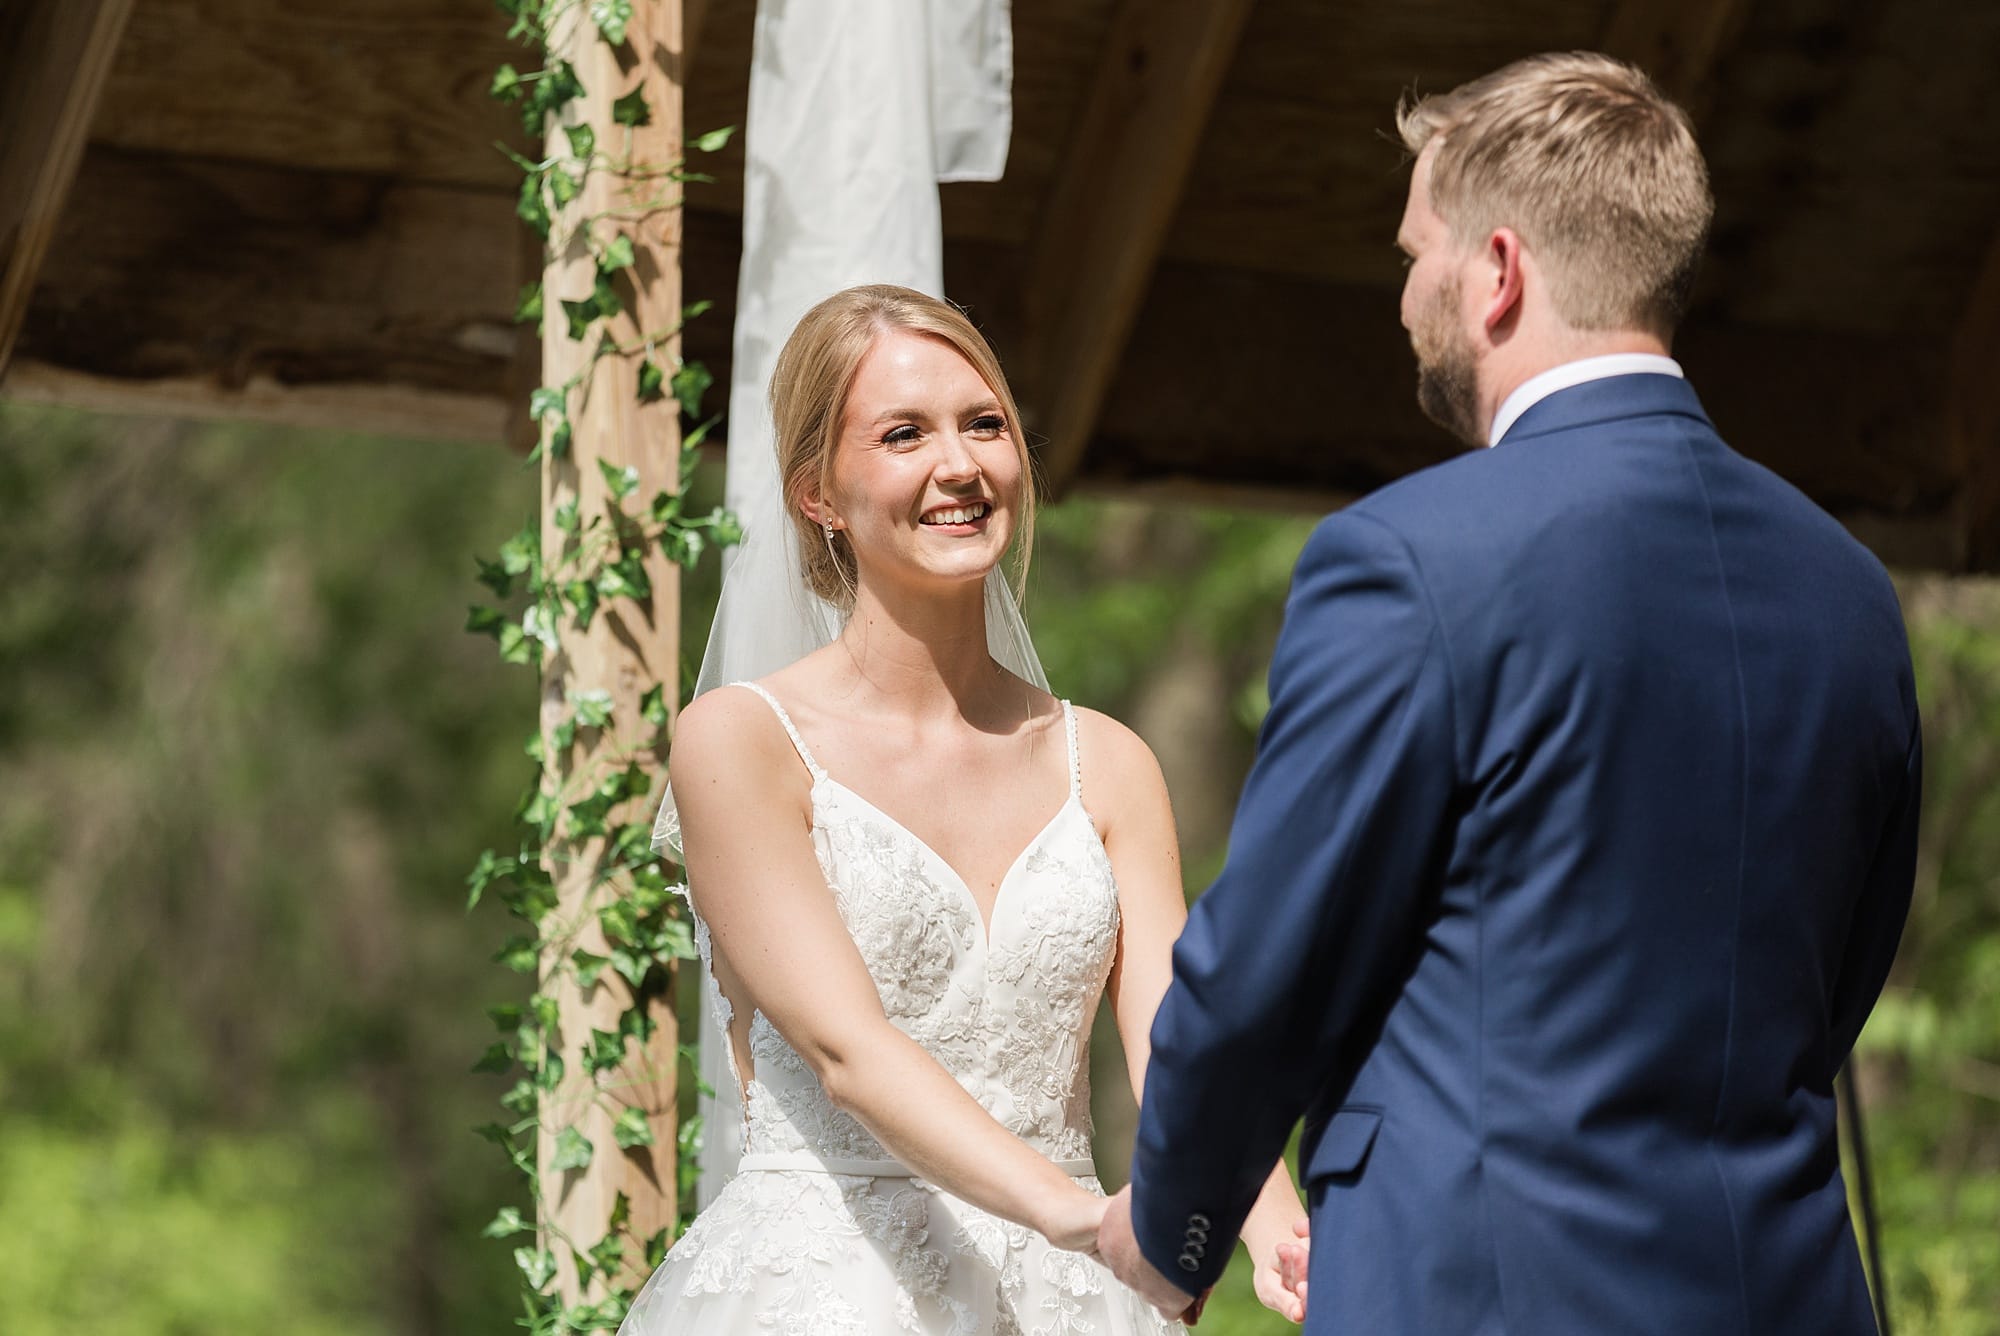 Bride smiles at her groom during their outdoor summer wedding ceremony